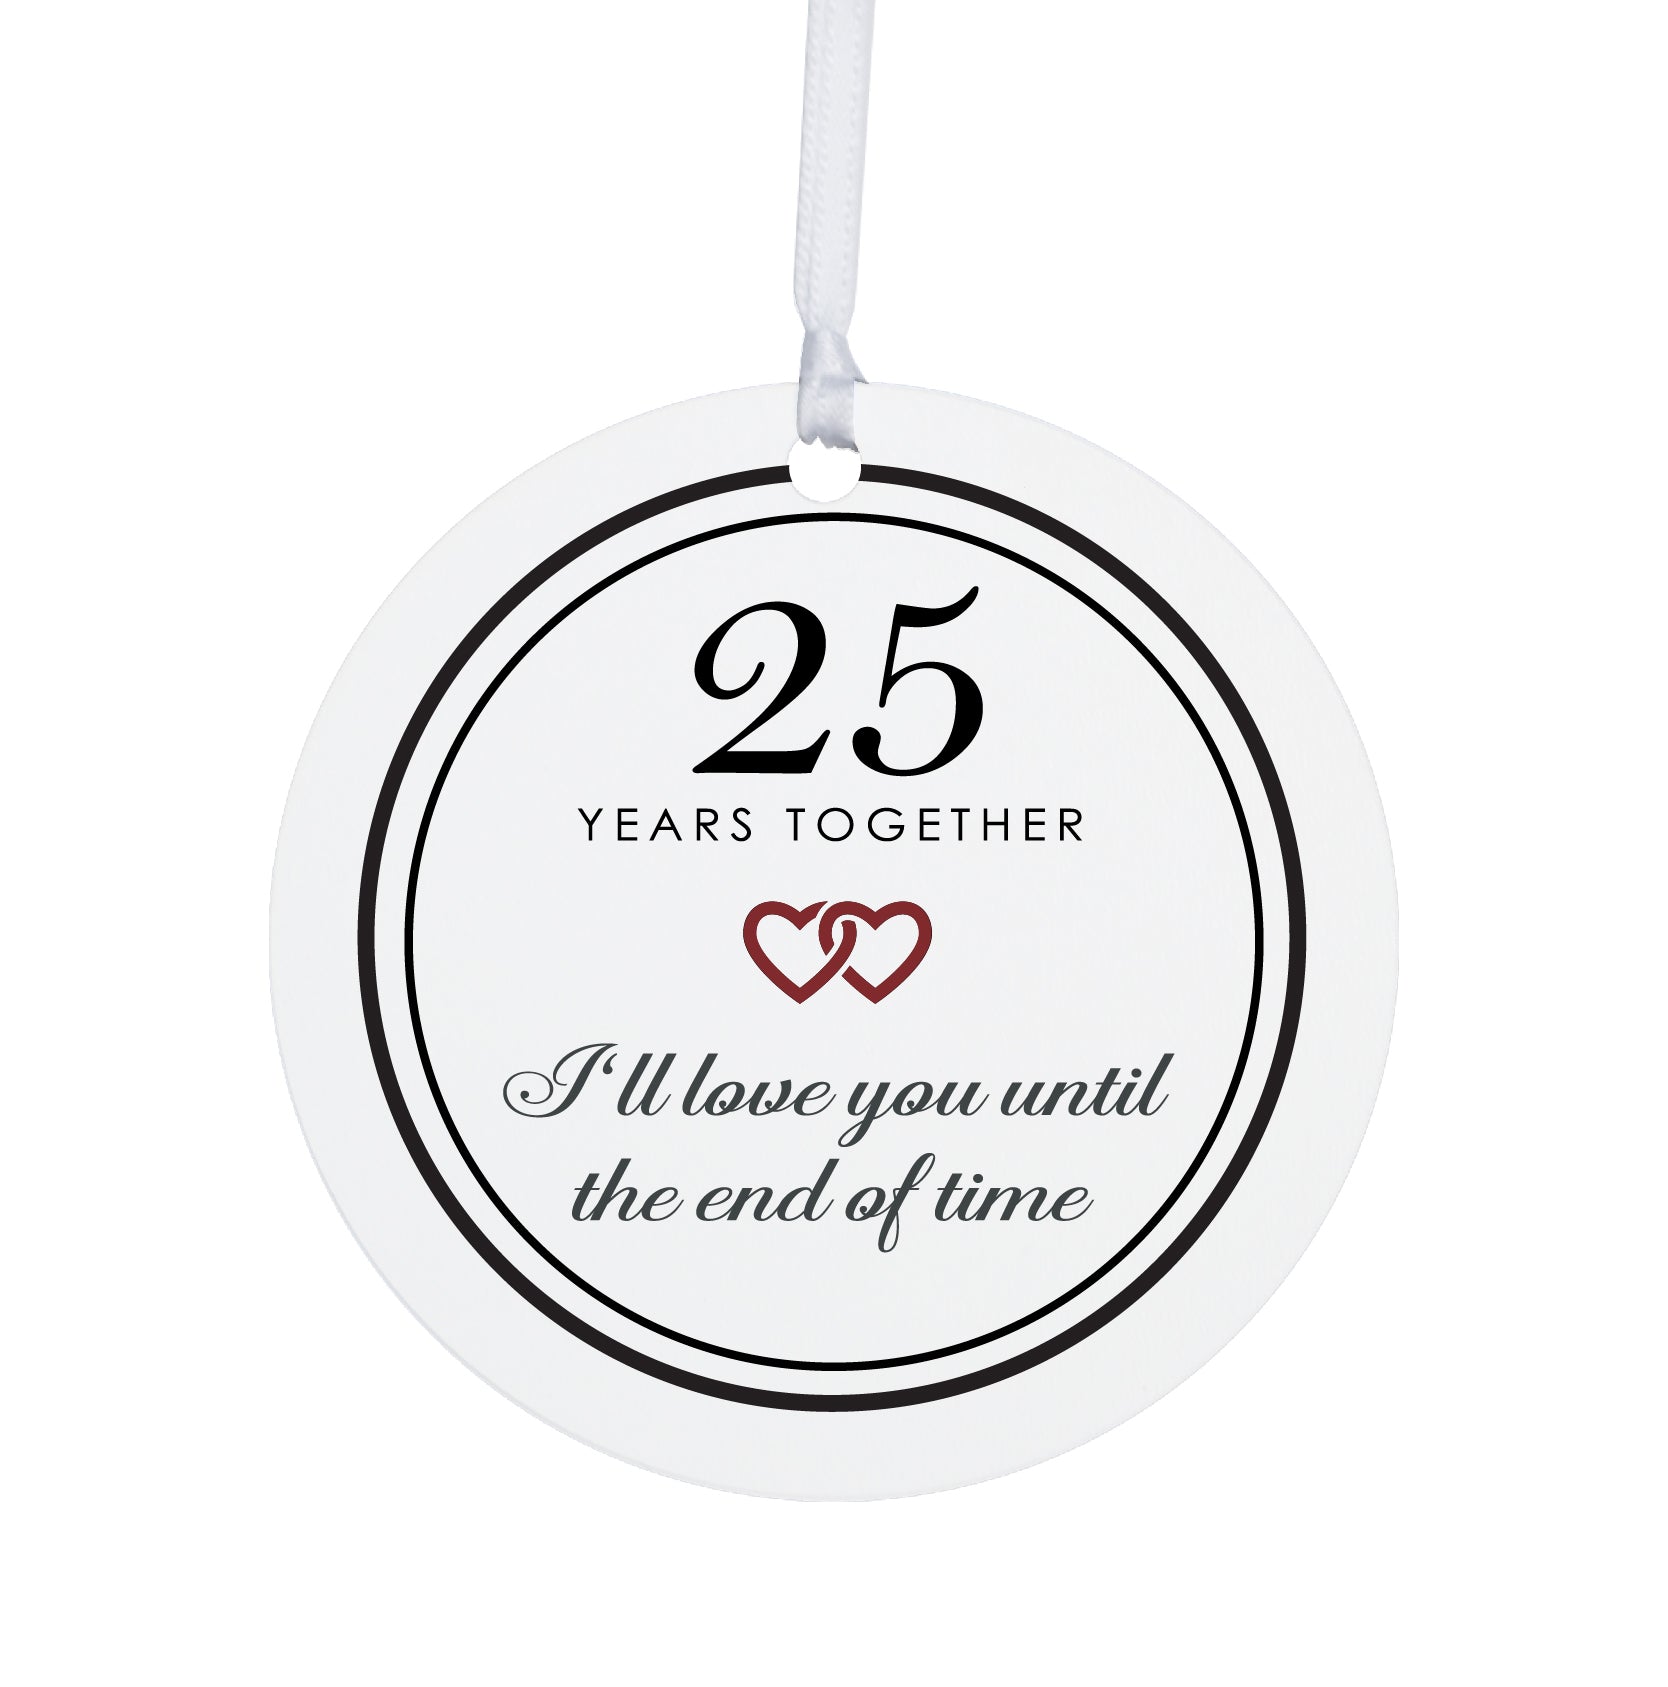 25th Anniversary Gifts at Gifts.com